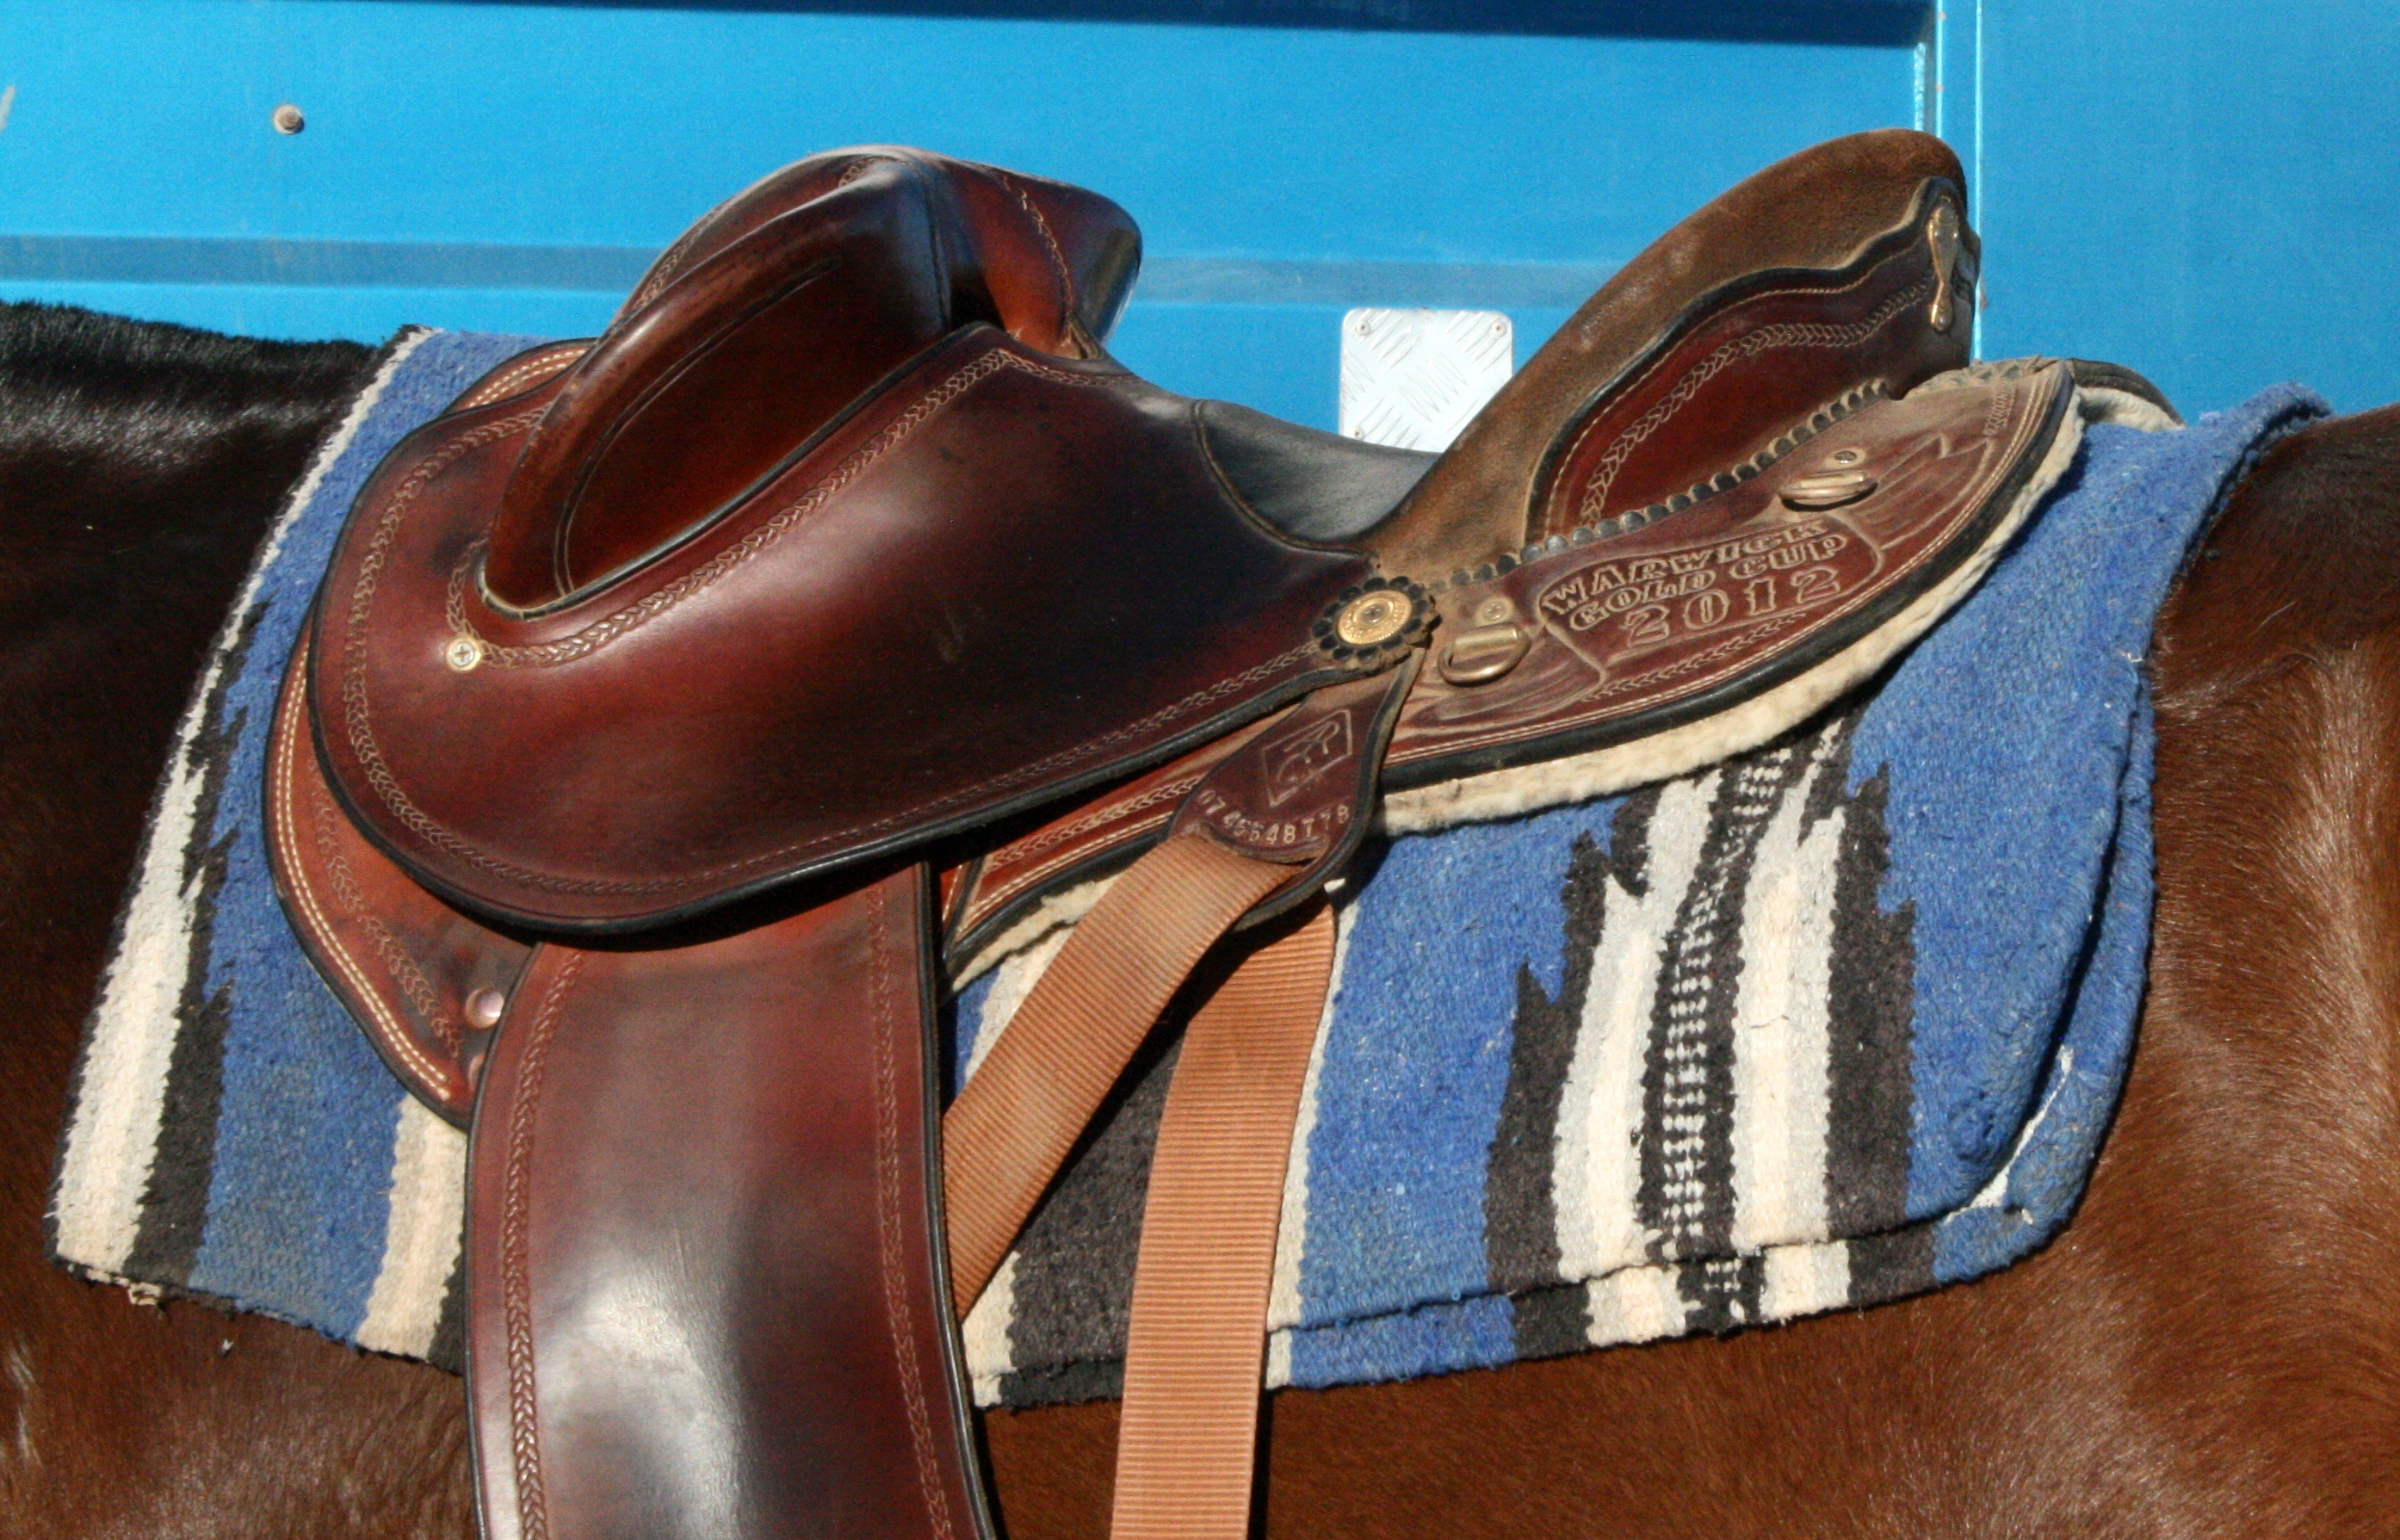 Cool Dust wearing the 2012 Warwick Gold Cup trophy saddle made by Tony Clifford Custom Saddlery.